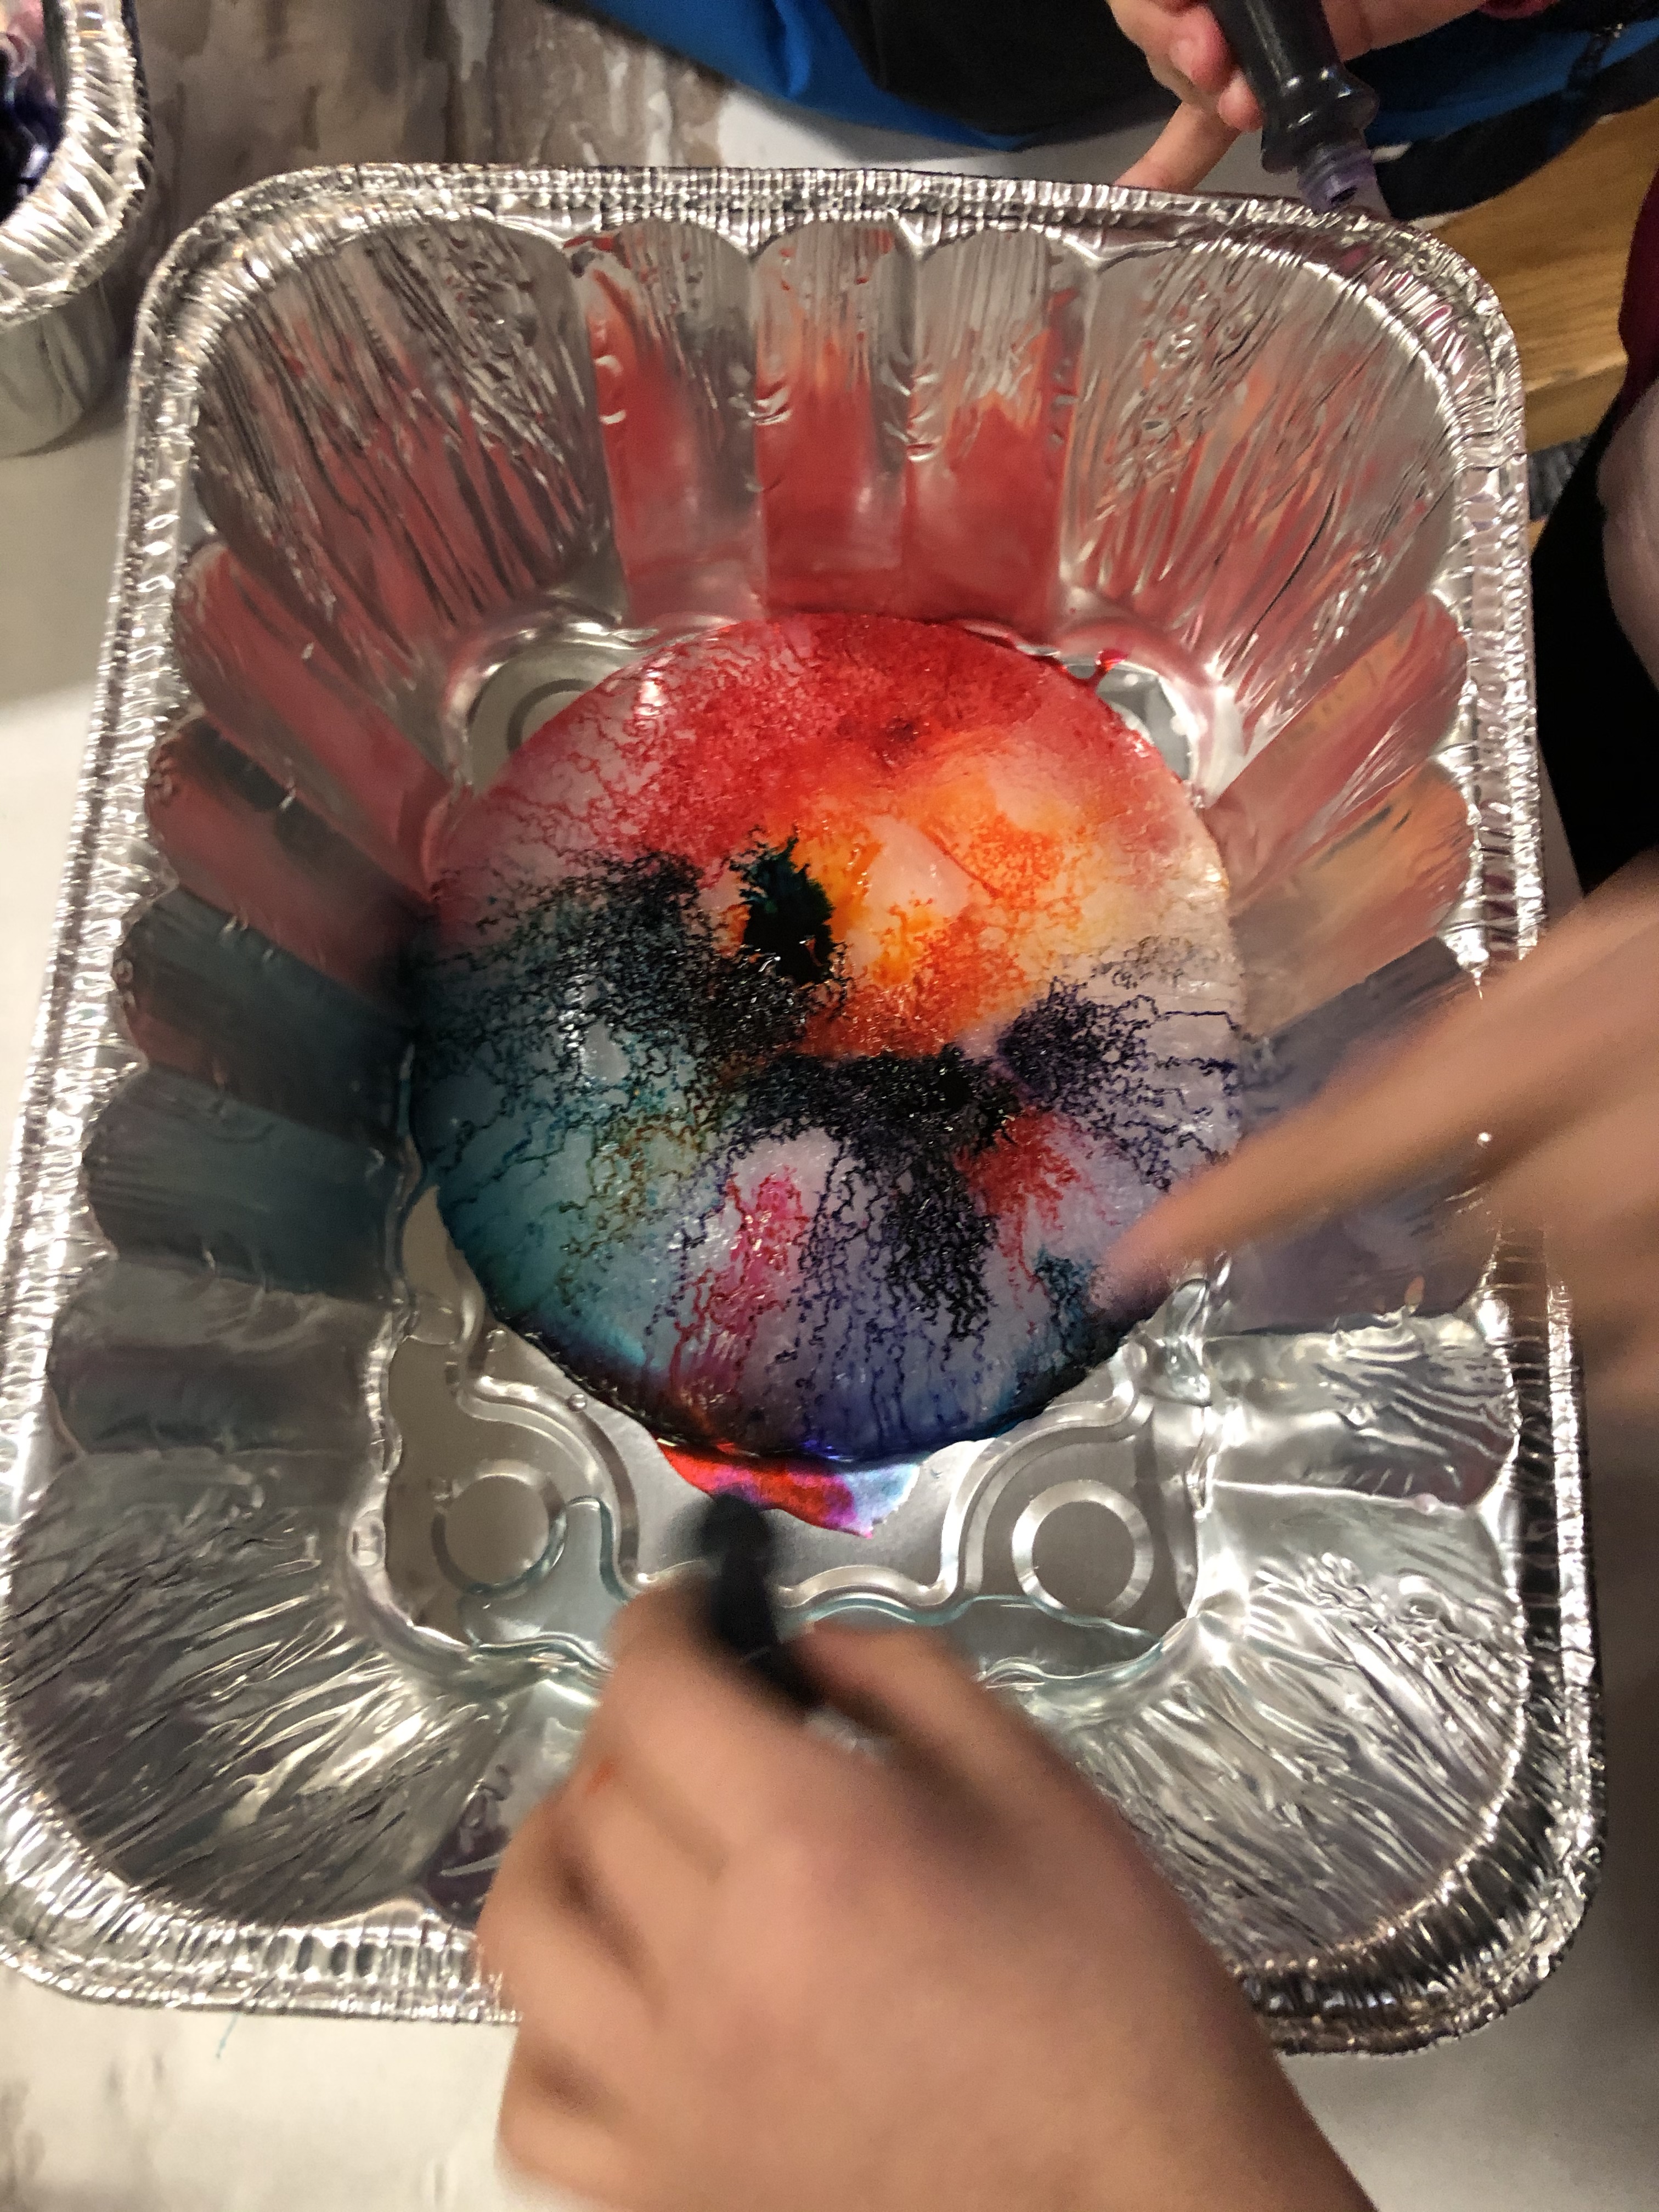 ice cube melting science project